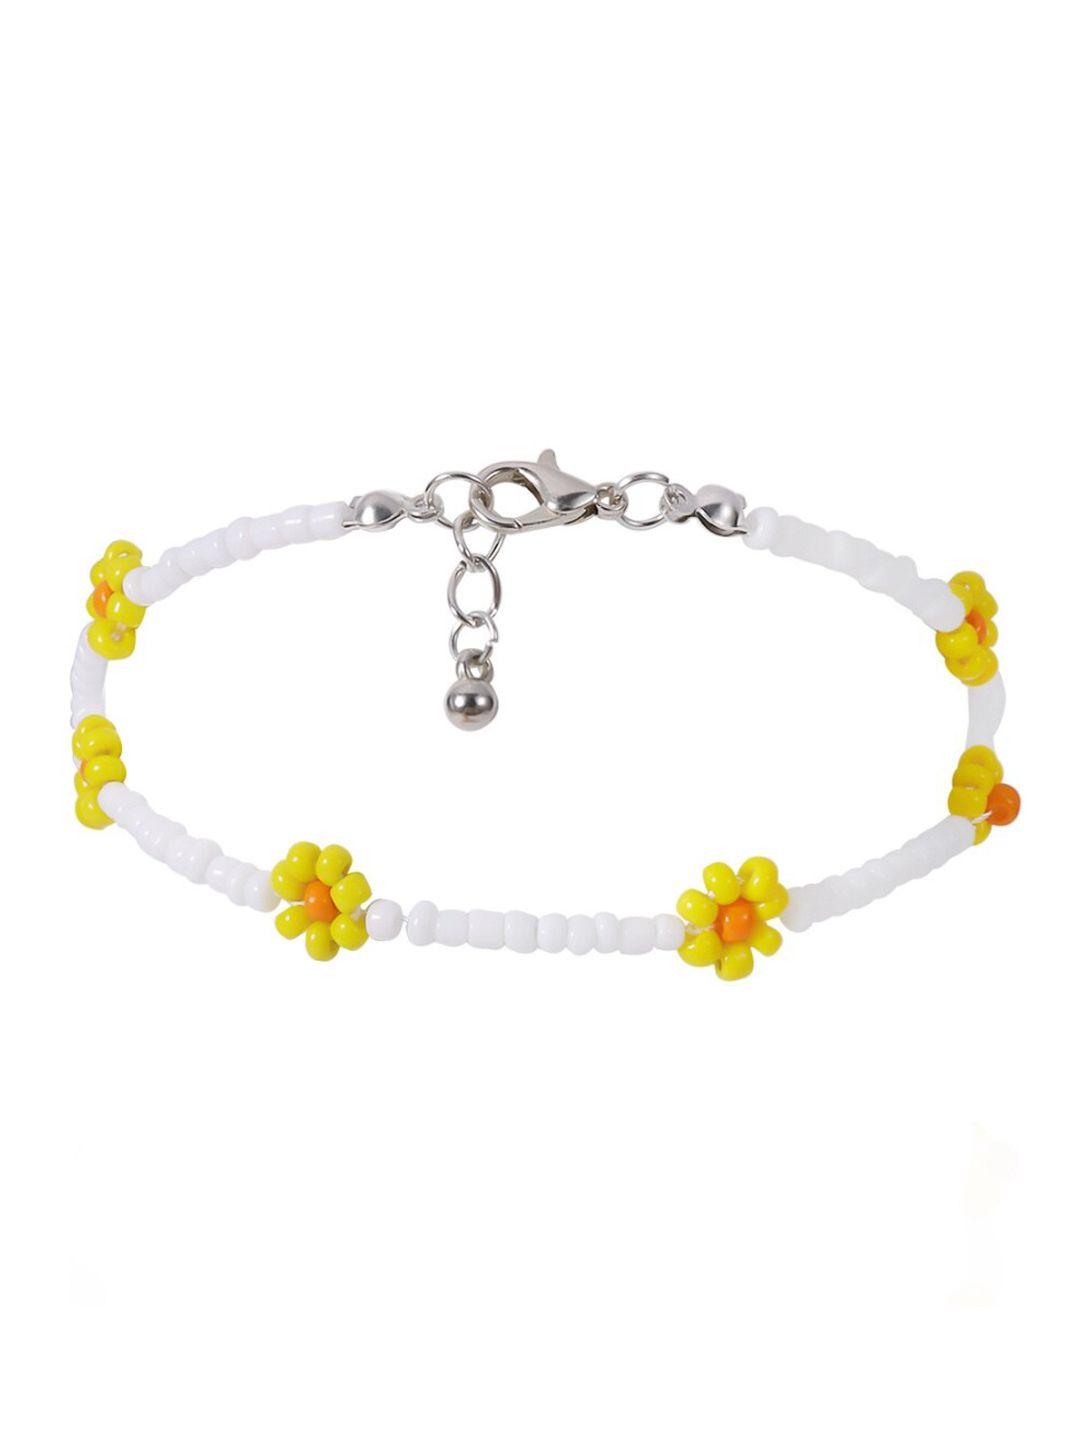 aquastreet silver-plated flower motif beaded anklet